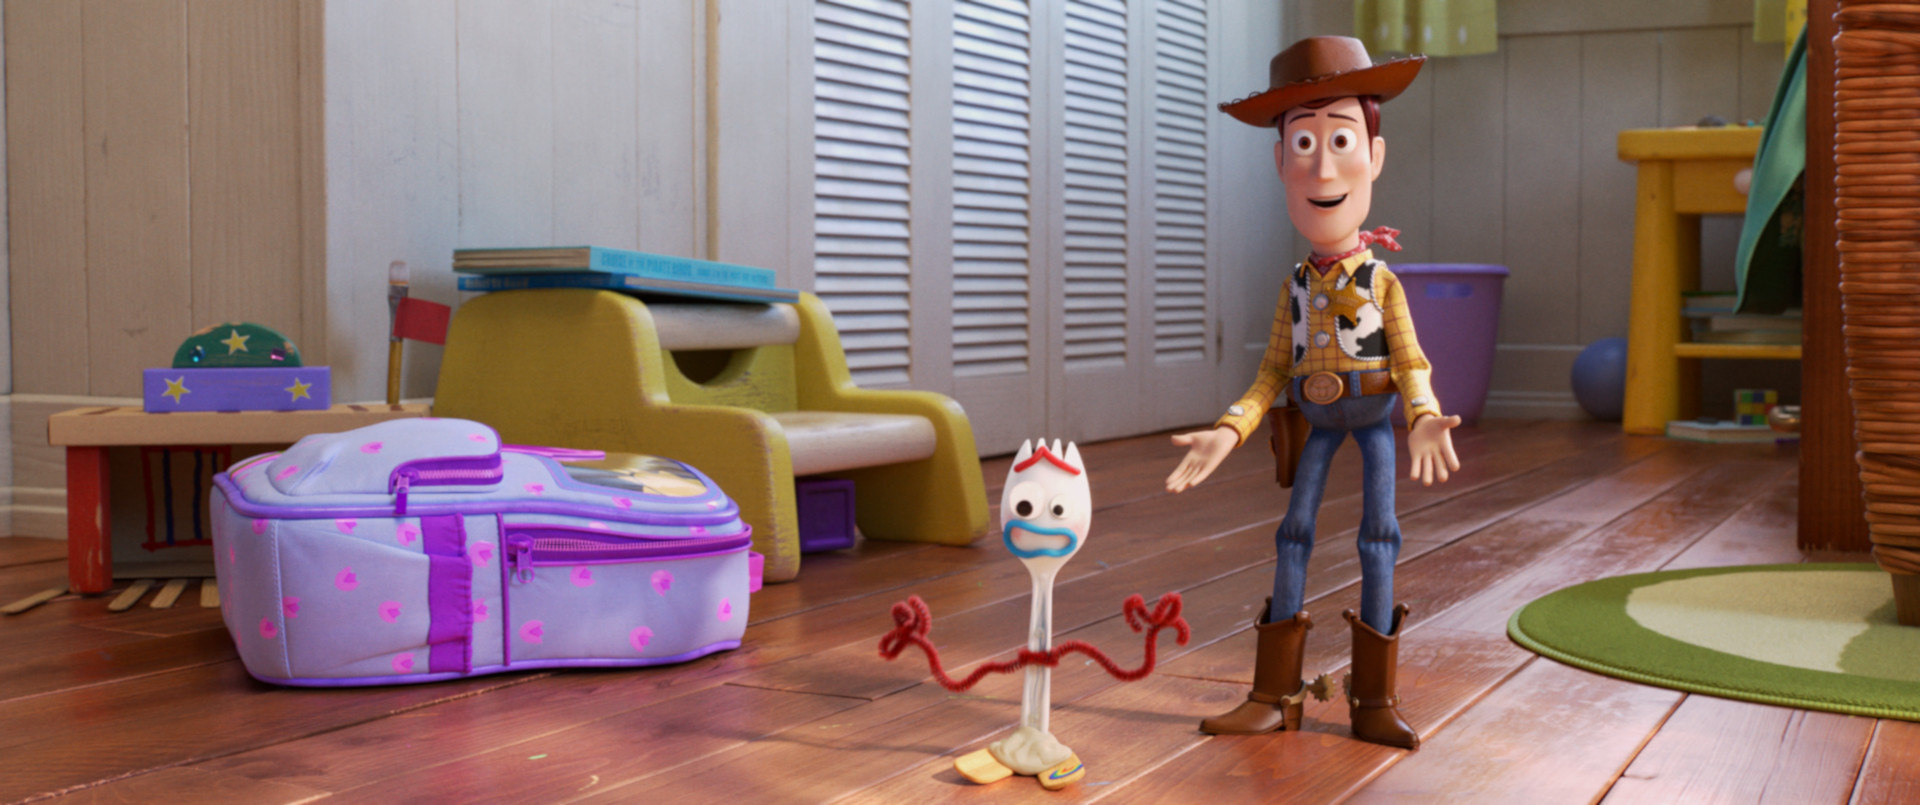 Forky Must Be Saved Pixar Releases Final ‘toy Story 4 Trailer